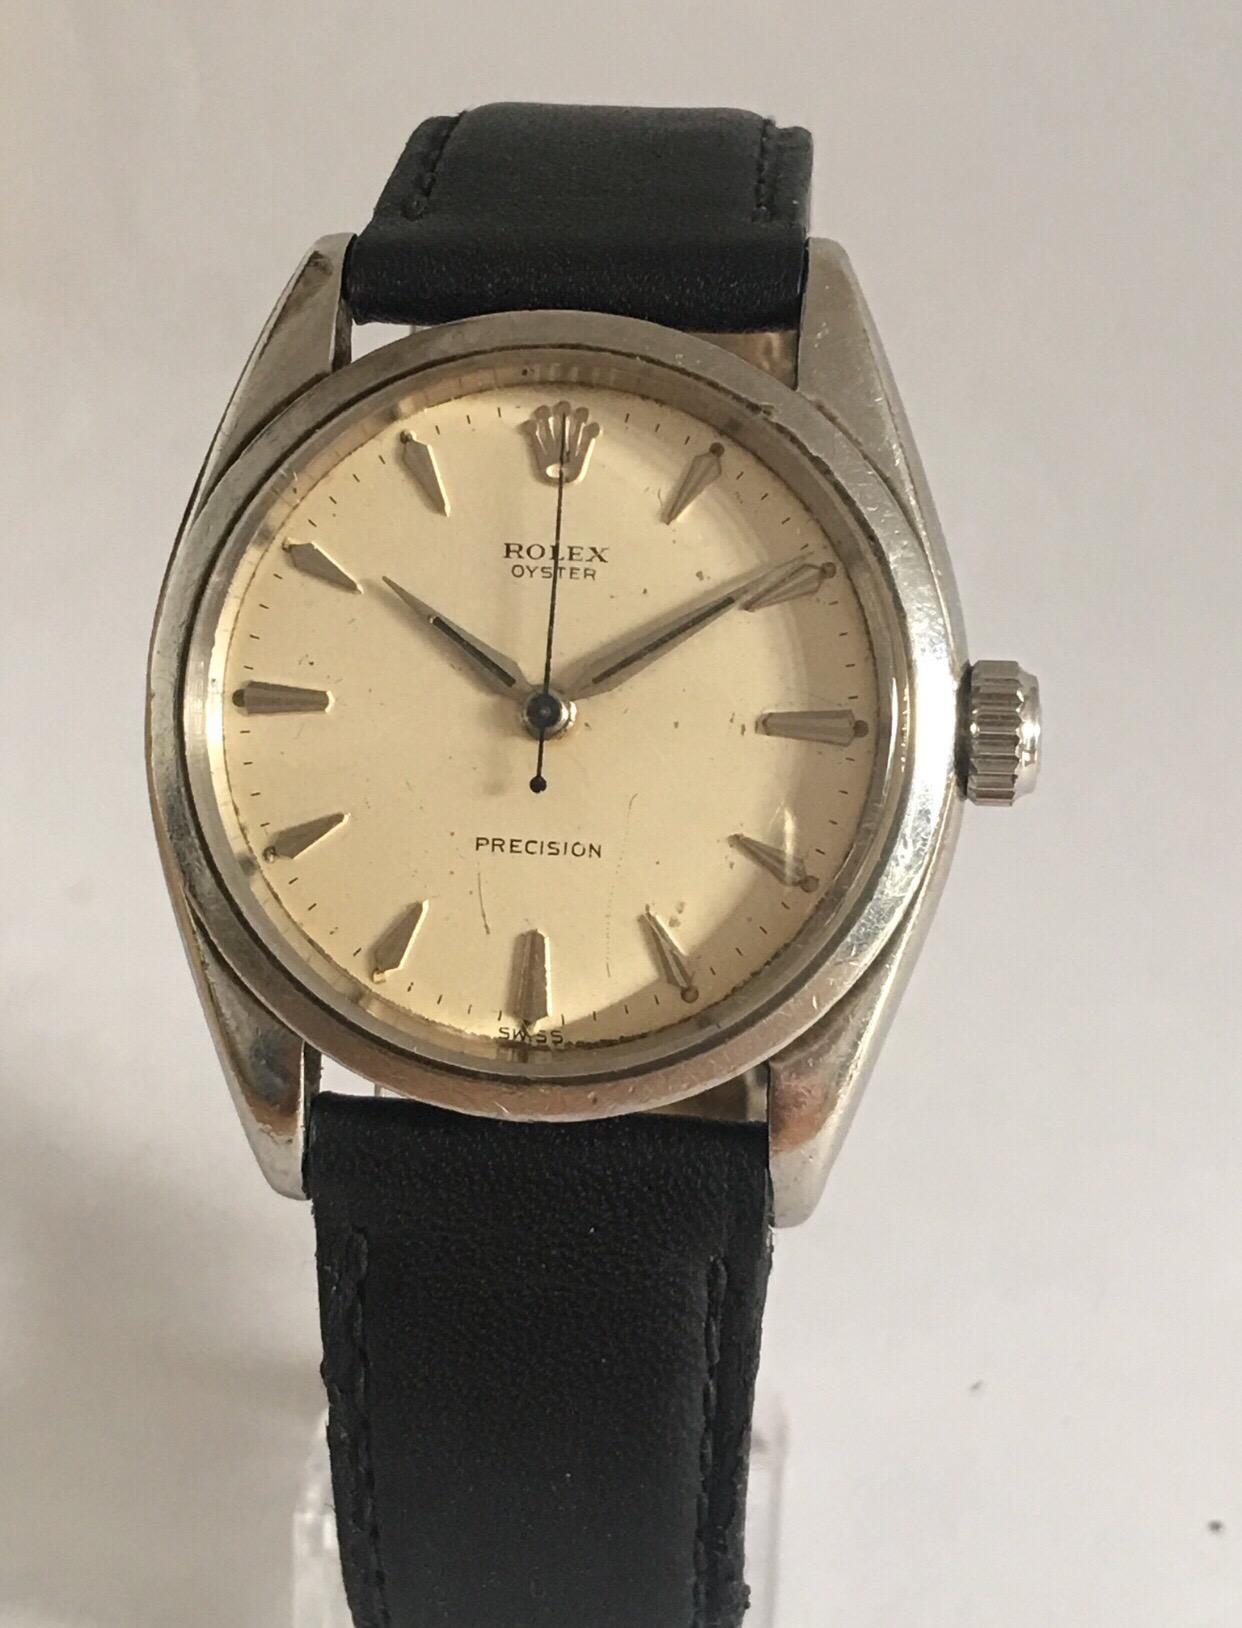 This Beautiful Classic mechanical watch is working and ticking well. Visible scratches on the watch case and the Glass as shown on the images. The strap is a bit worn. And also scratches / wore marks on the dial

Please study the images carefully as